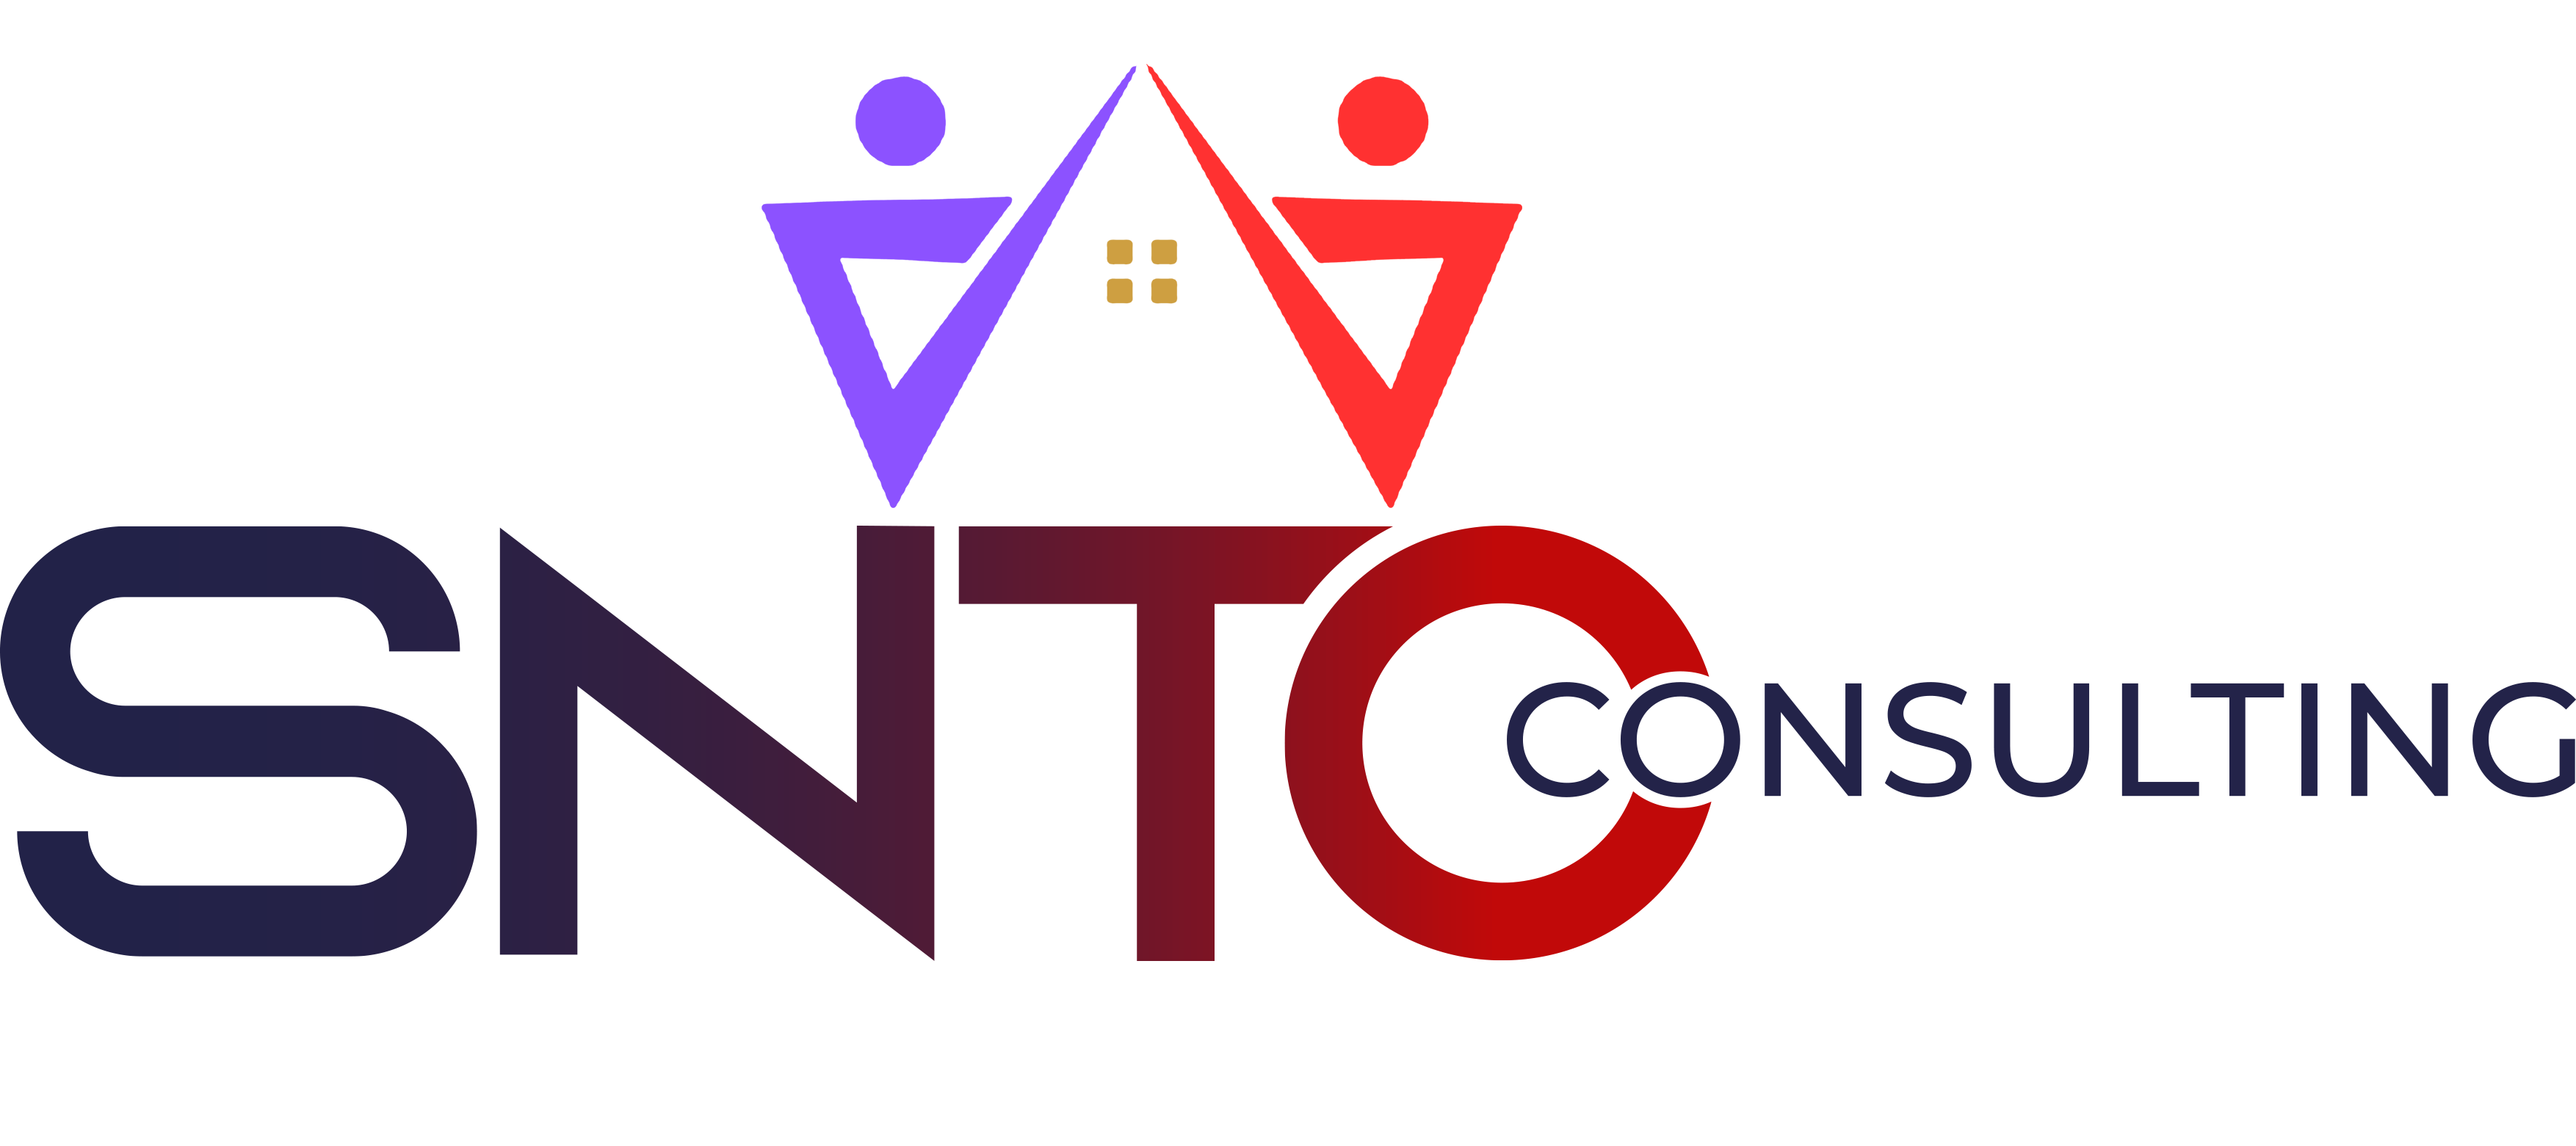 SNTO CONSULTING